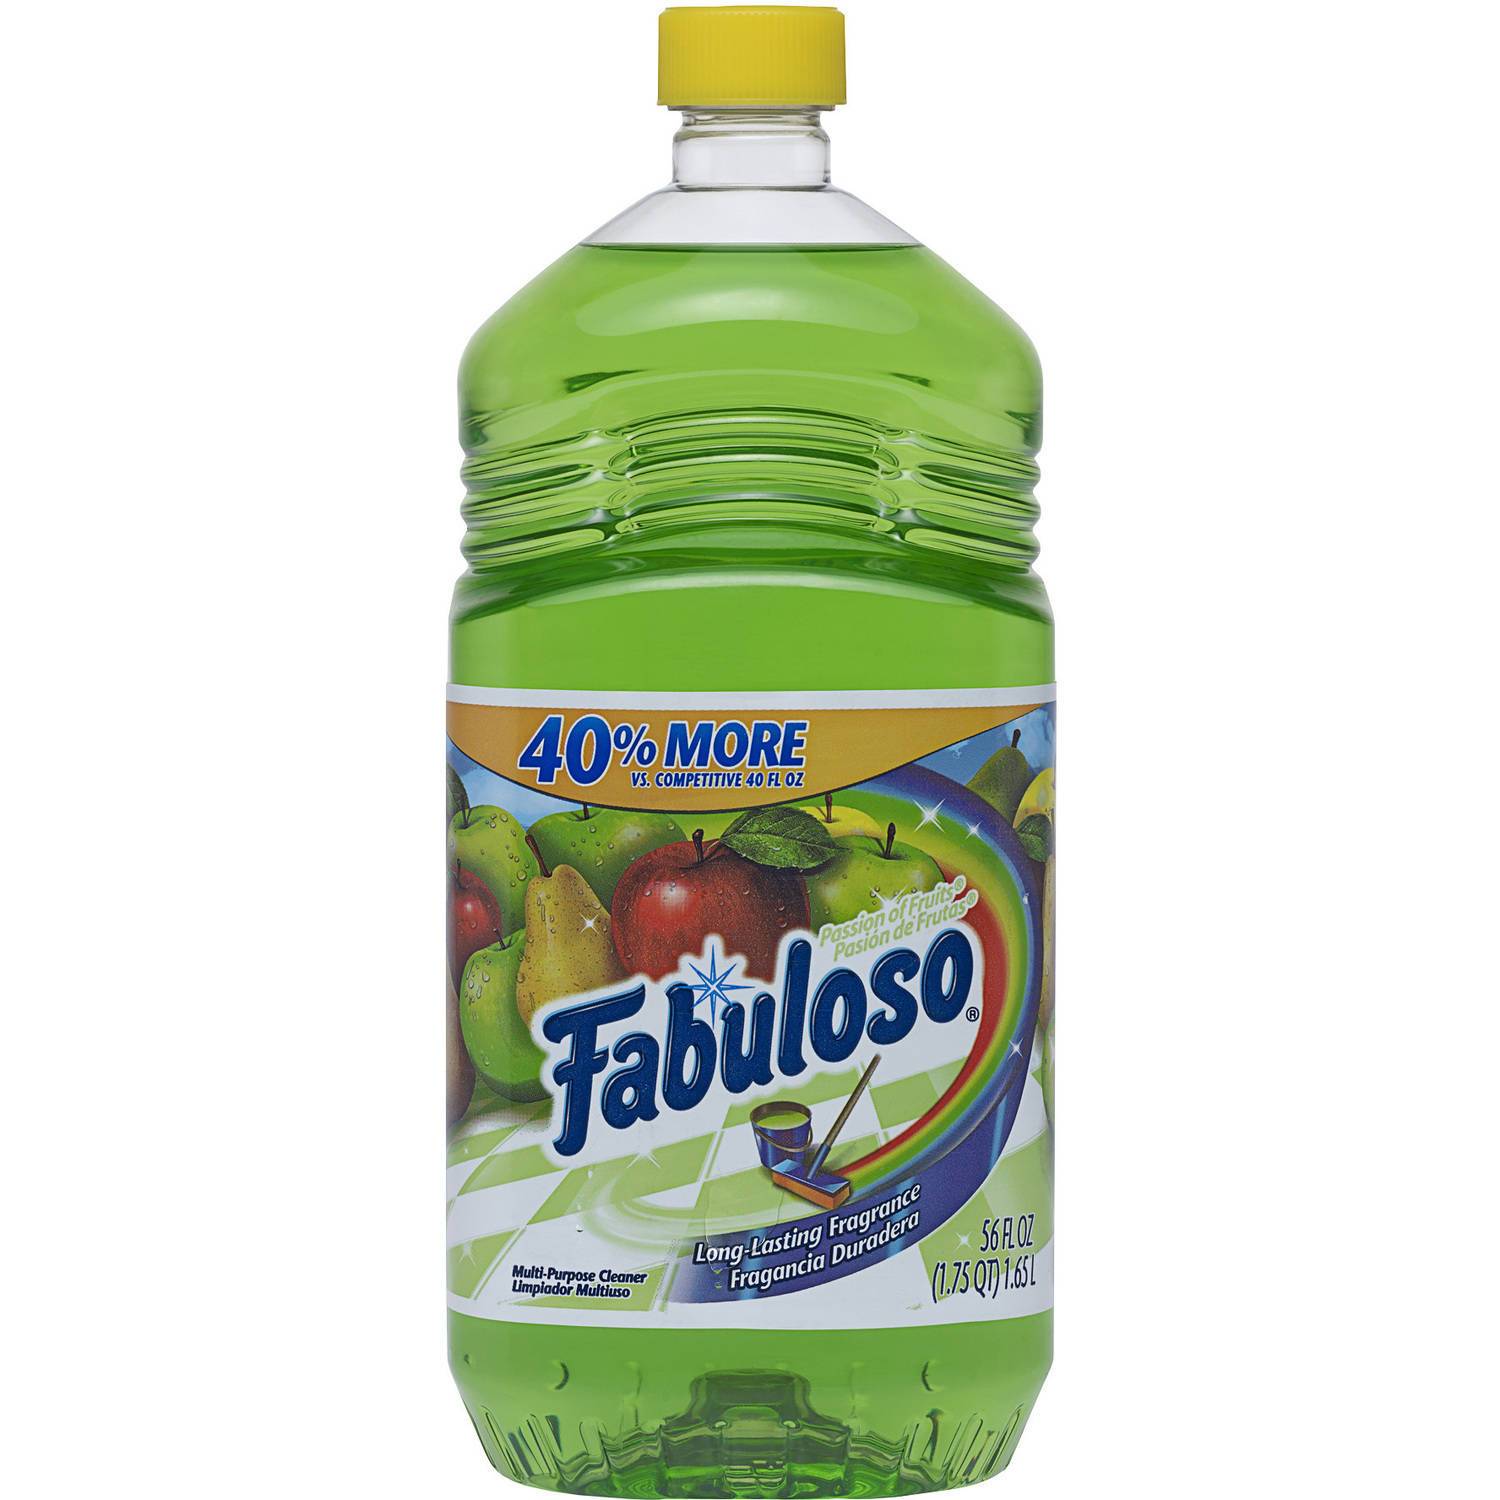 Fabuloso - Multi-Purpose Cleaner, Passion Fruit Scent, 56 Fluid Ounce - Case of 6